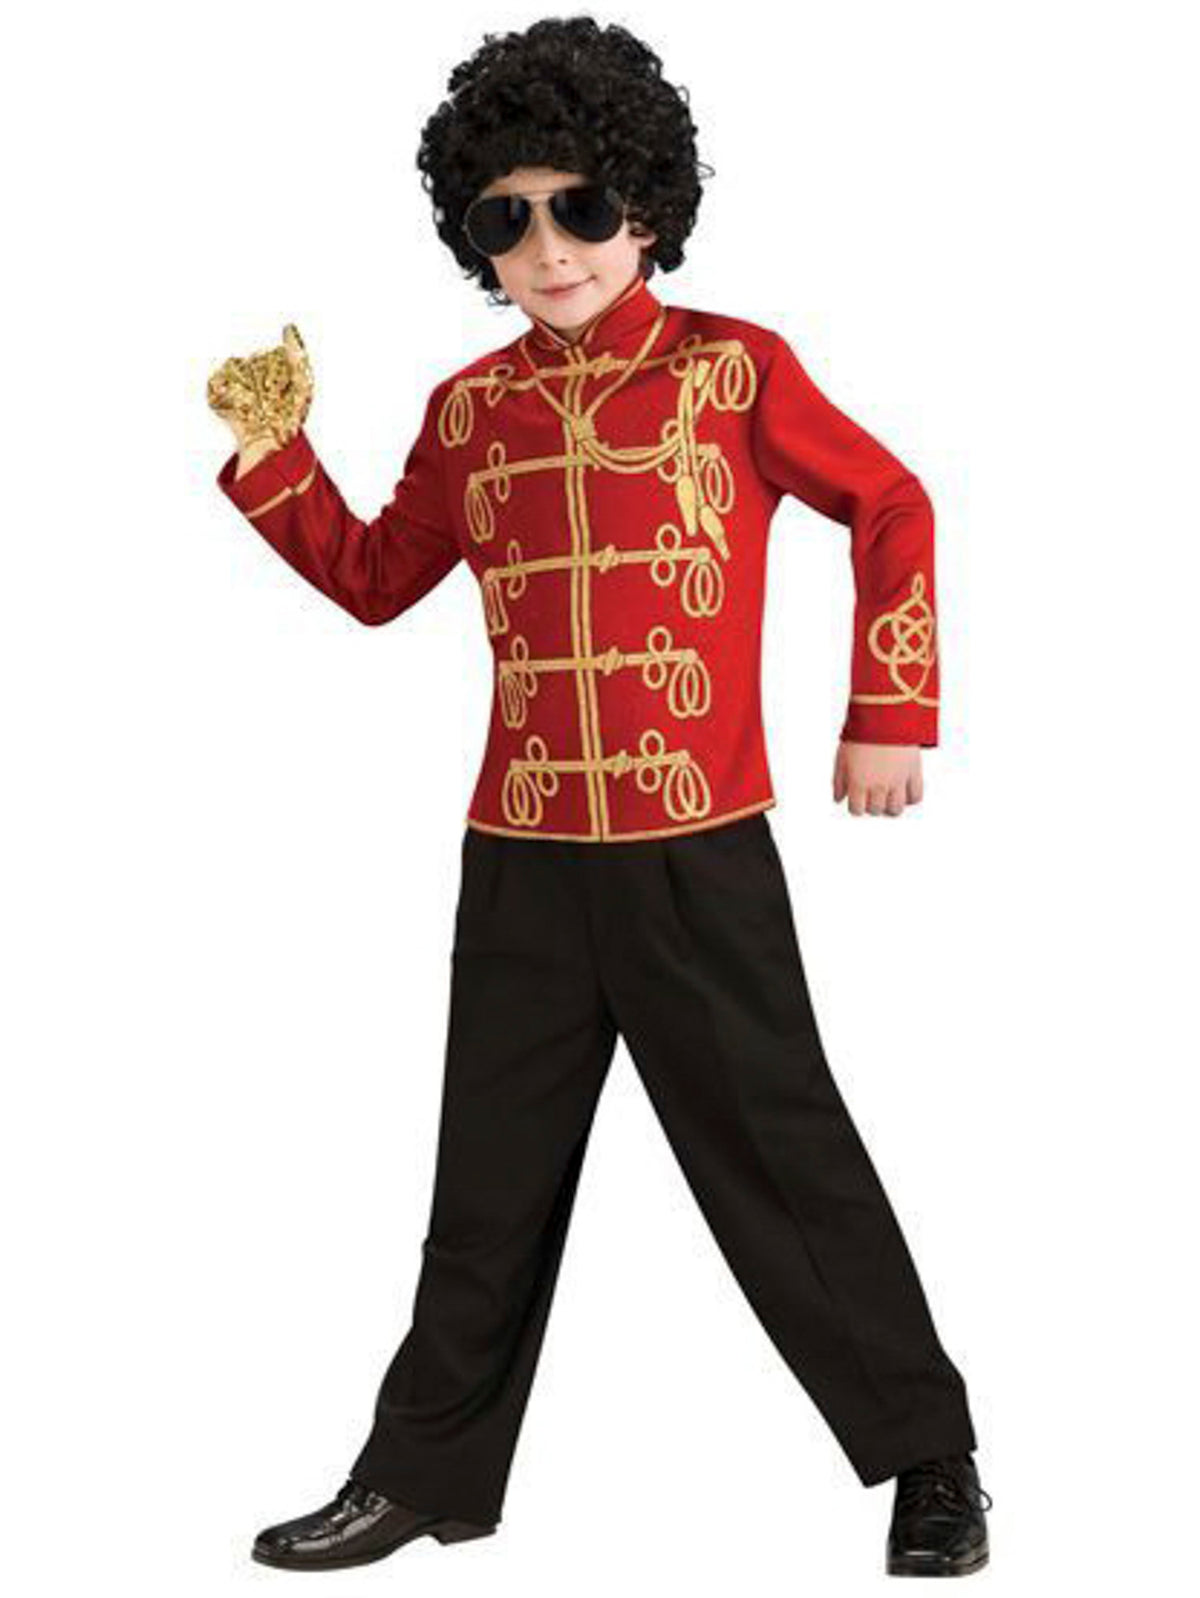 Michael Jackson Costume Accessory Kit, Wig, Sunglasses, Glove and Hat -  Licensed